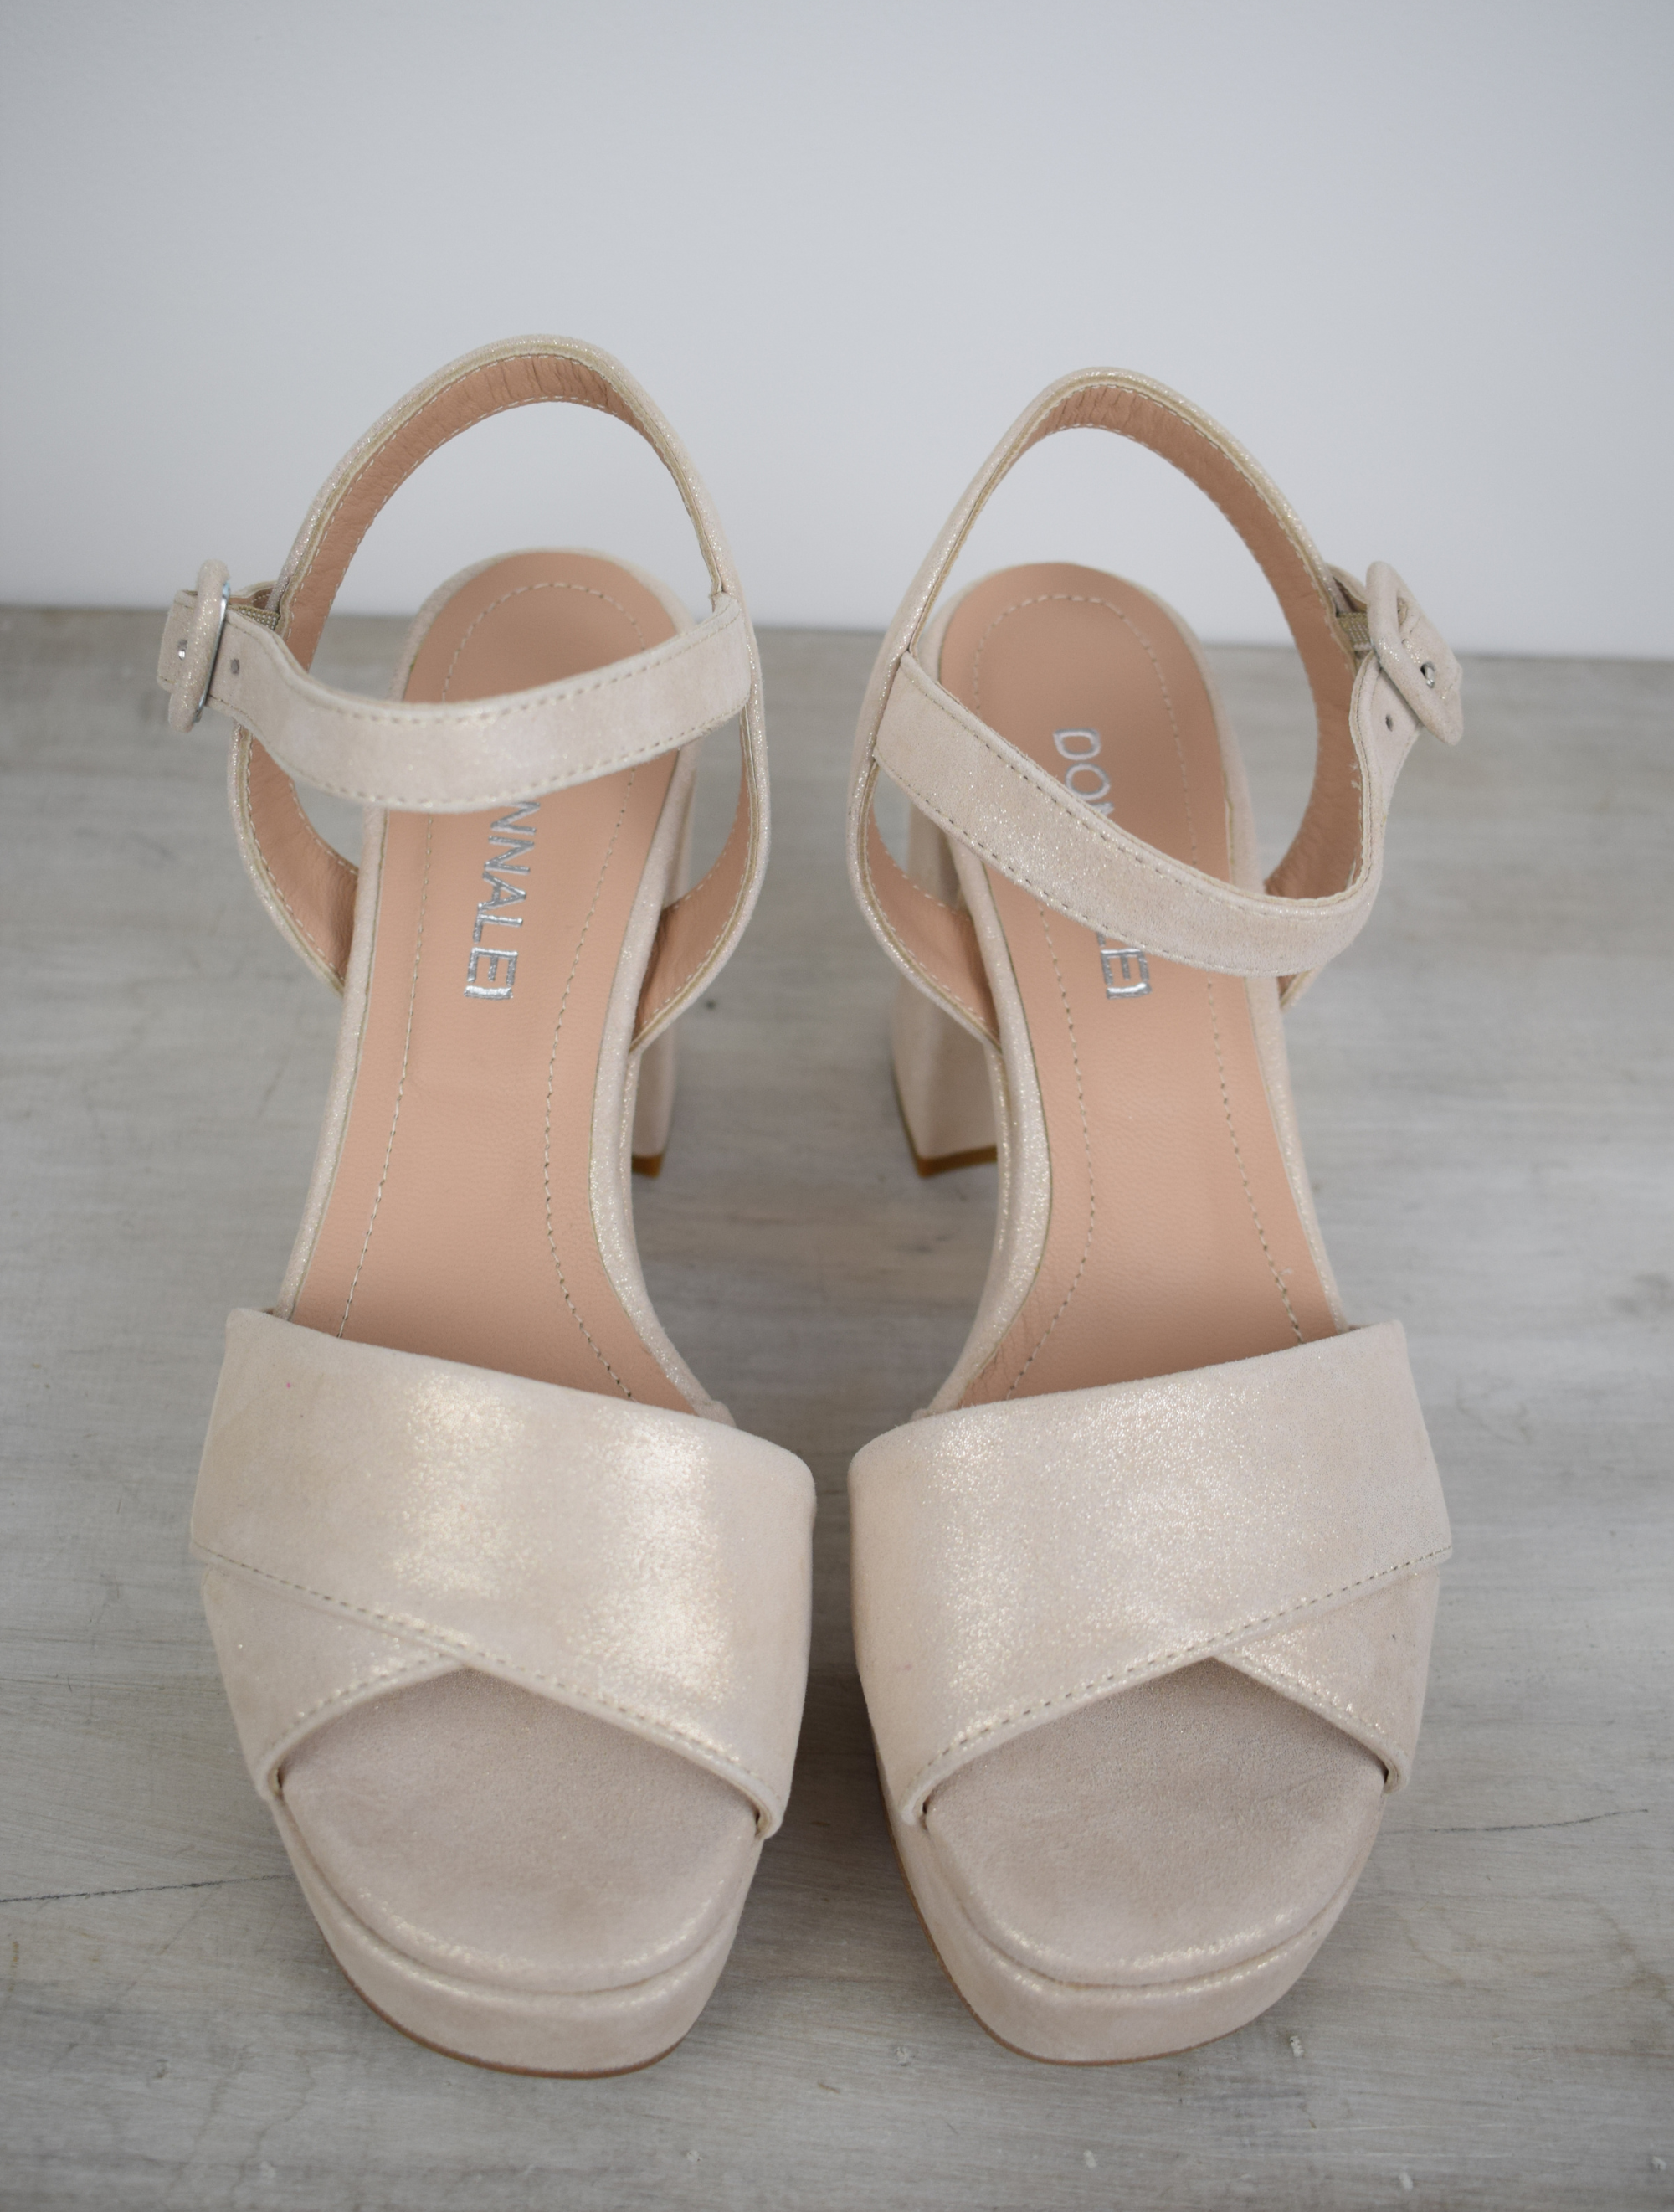 Latte sparkle platform sandal with cross straps and ankle strap with buckle fastening